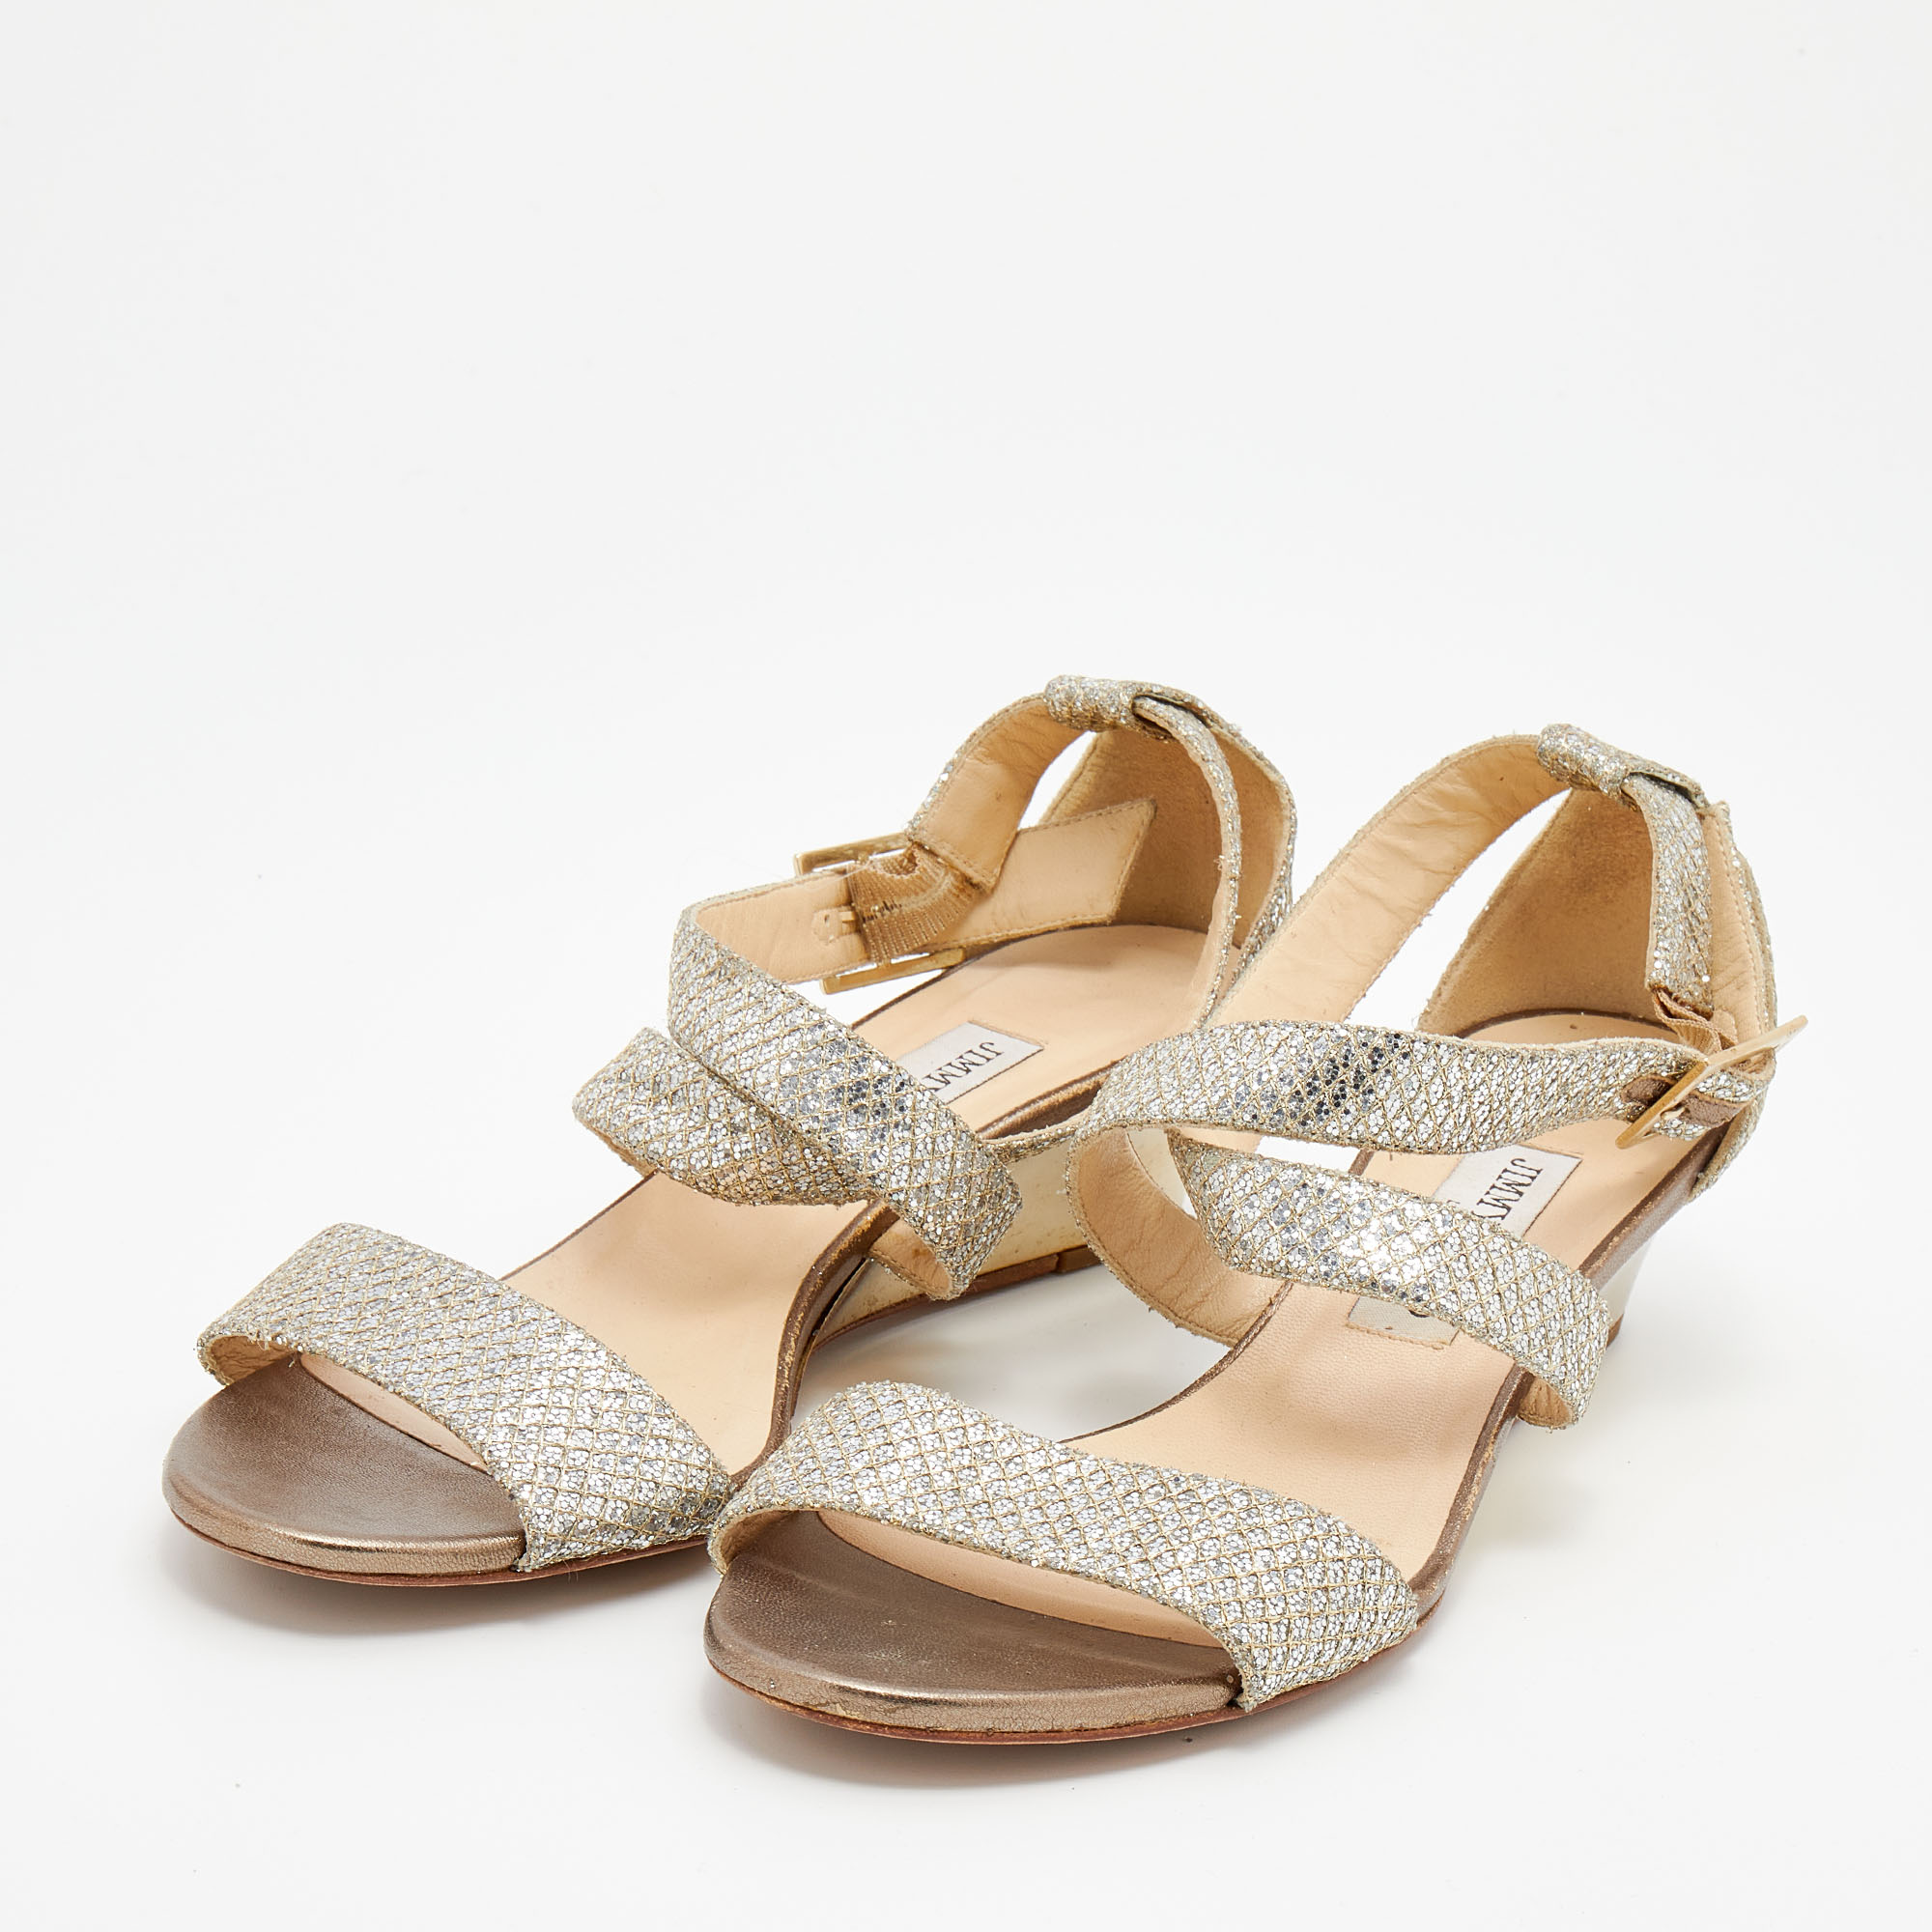 

Jimmy Choo Silver/Gold Glitter And Lamé Fabric Wedge Ankle Strap Sandals Size